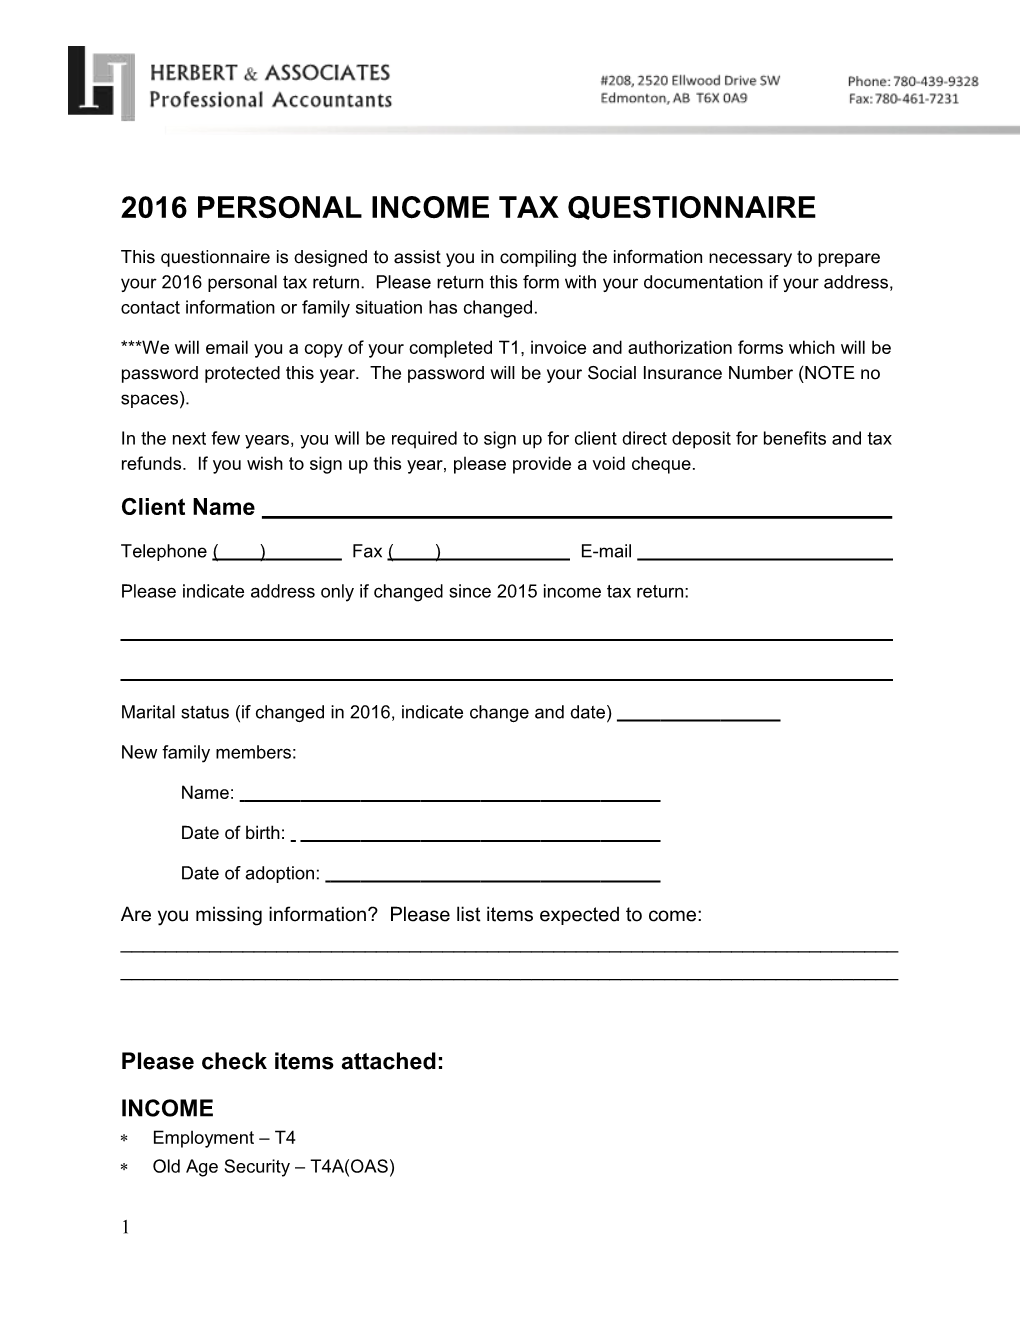 2007 Personal Income Tax Questionnaire